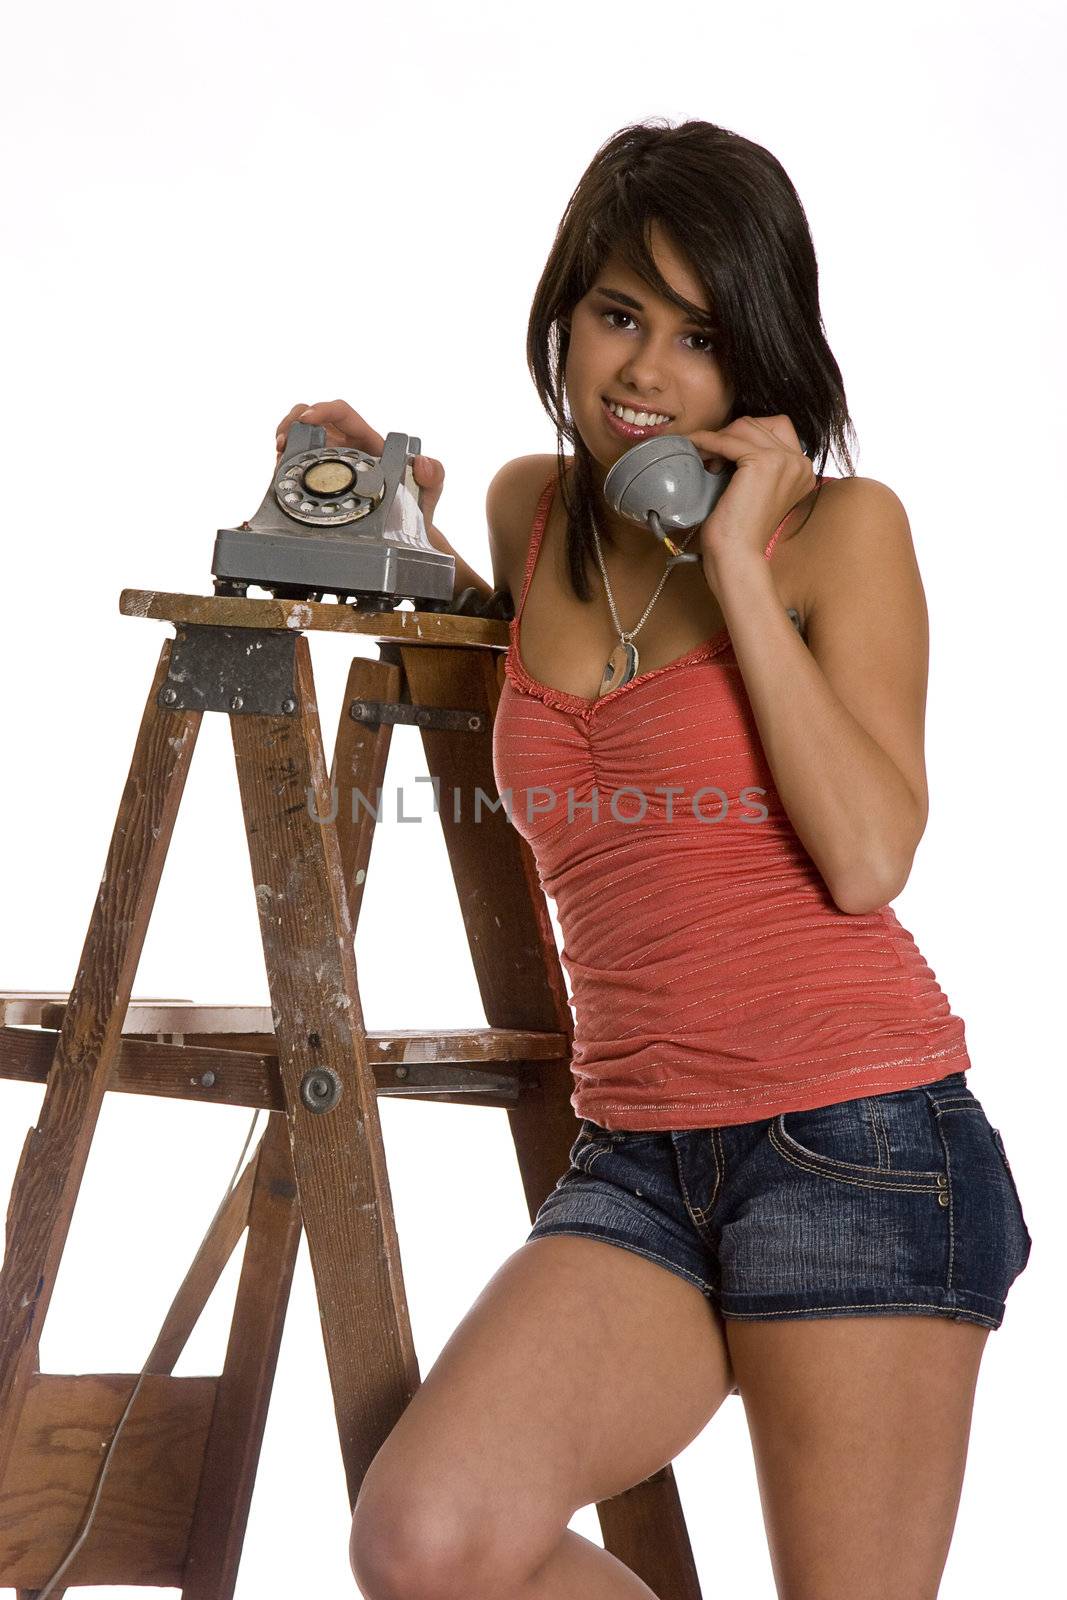 teenage girl standing on ladder talking on a old rotary phone, looking at the camera